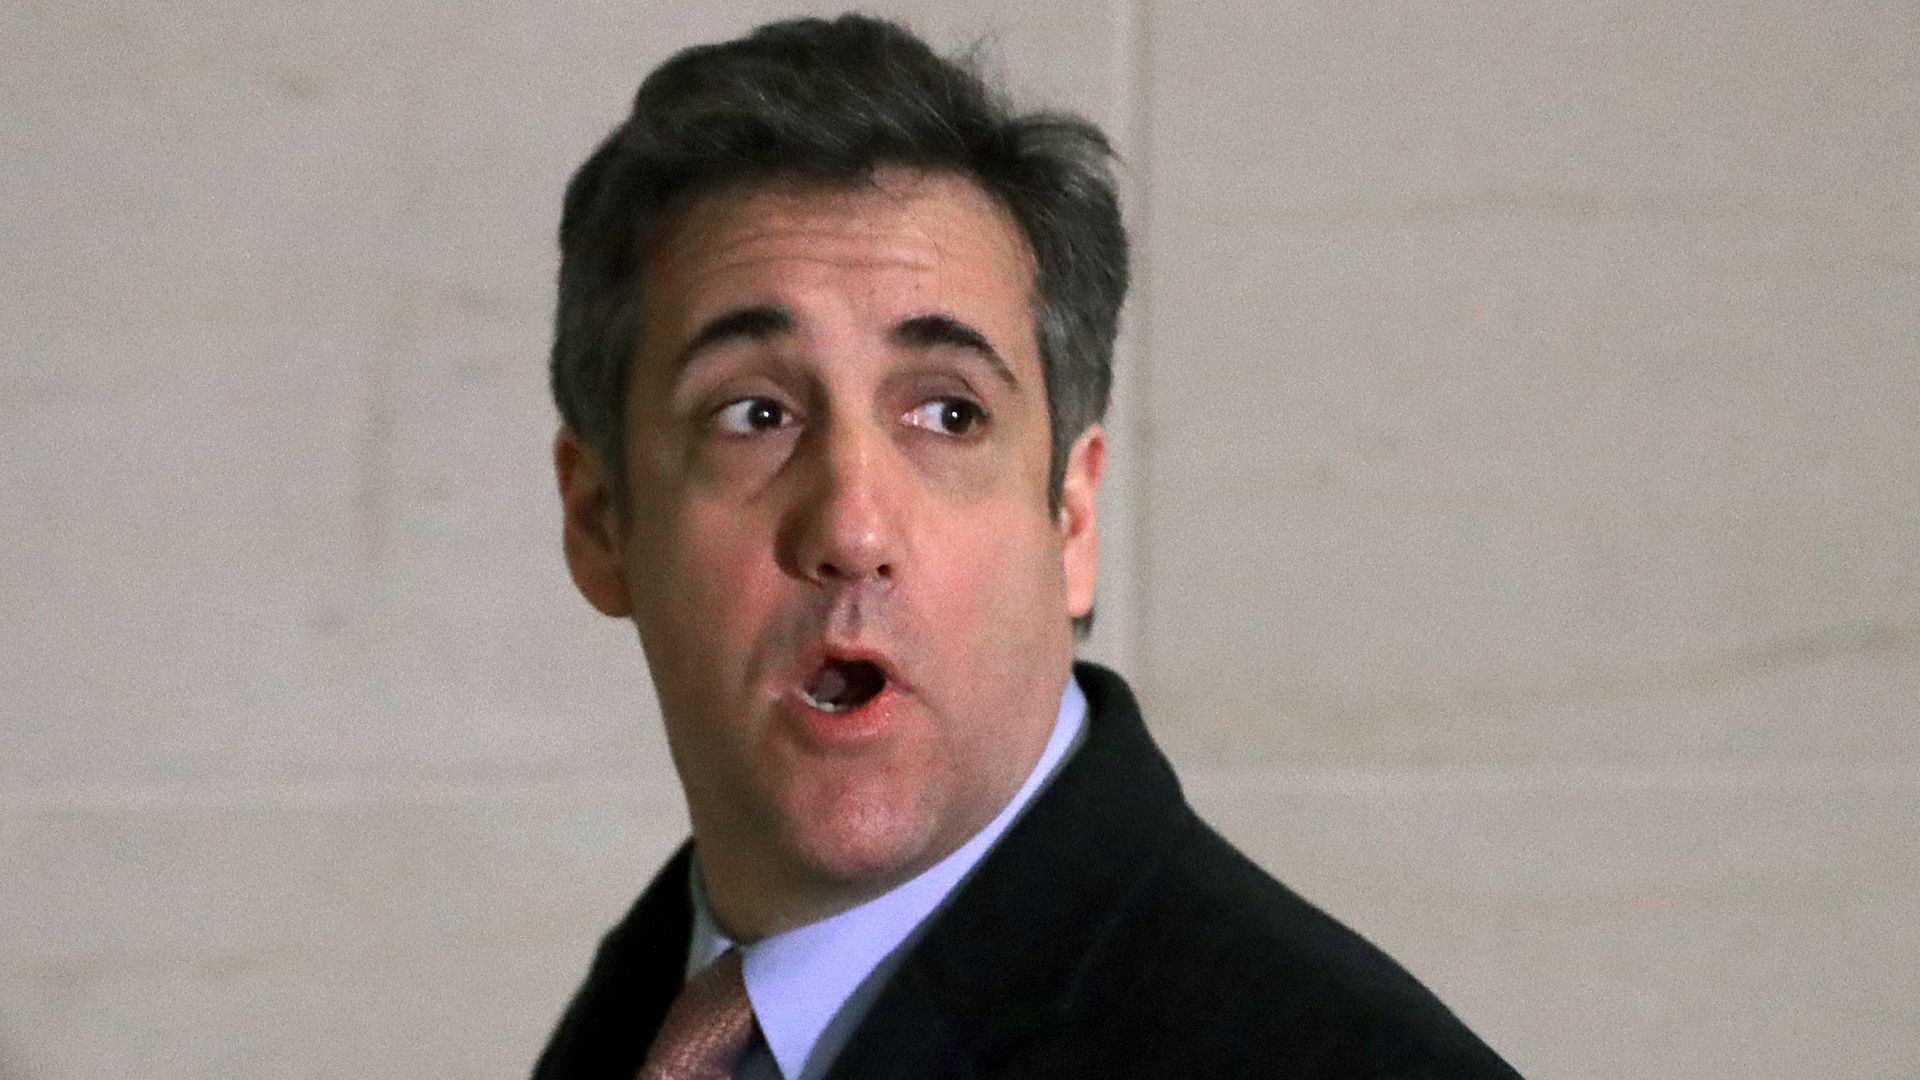 Michael Cohen's attorney sent a letter to the House Oversight Committee chairman.